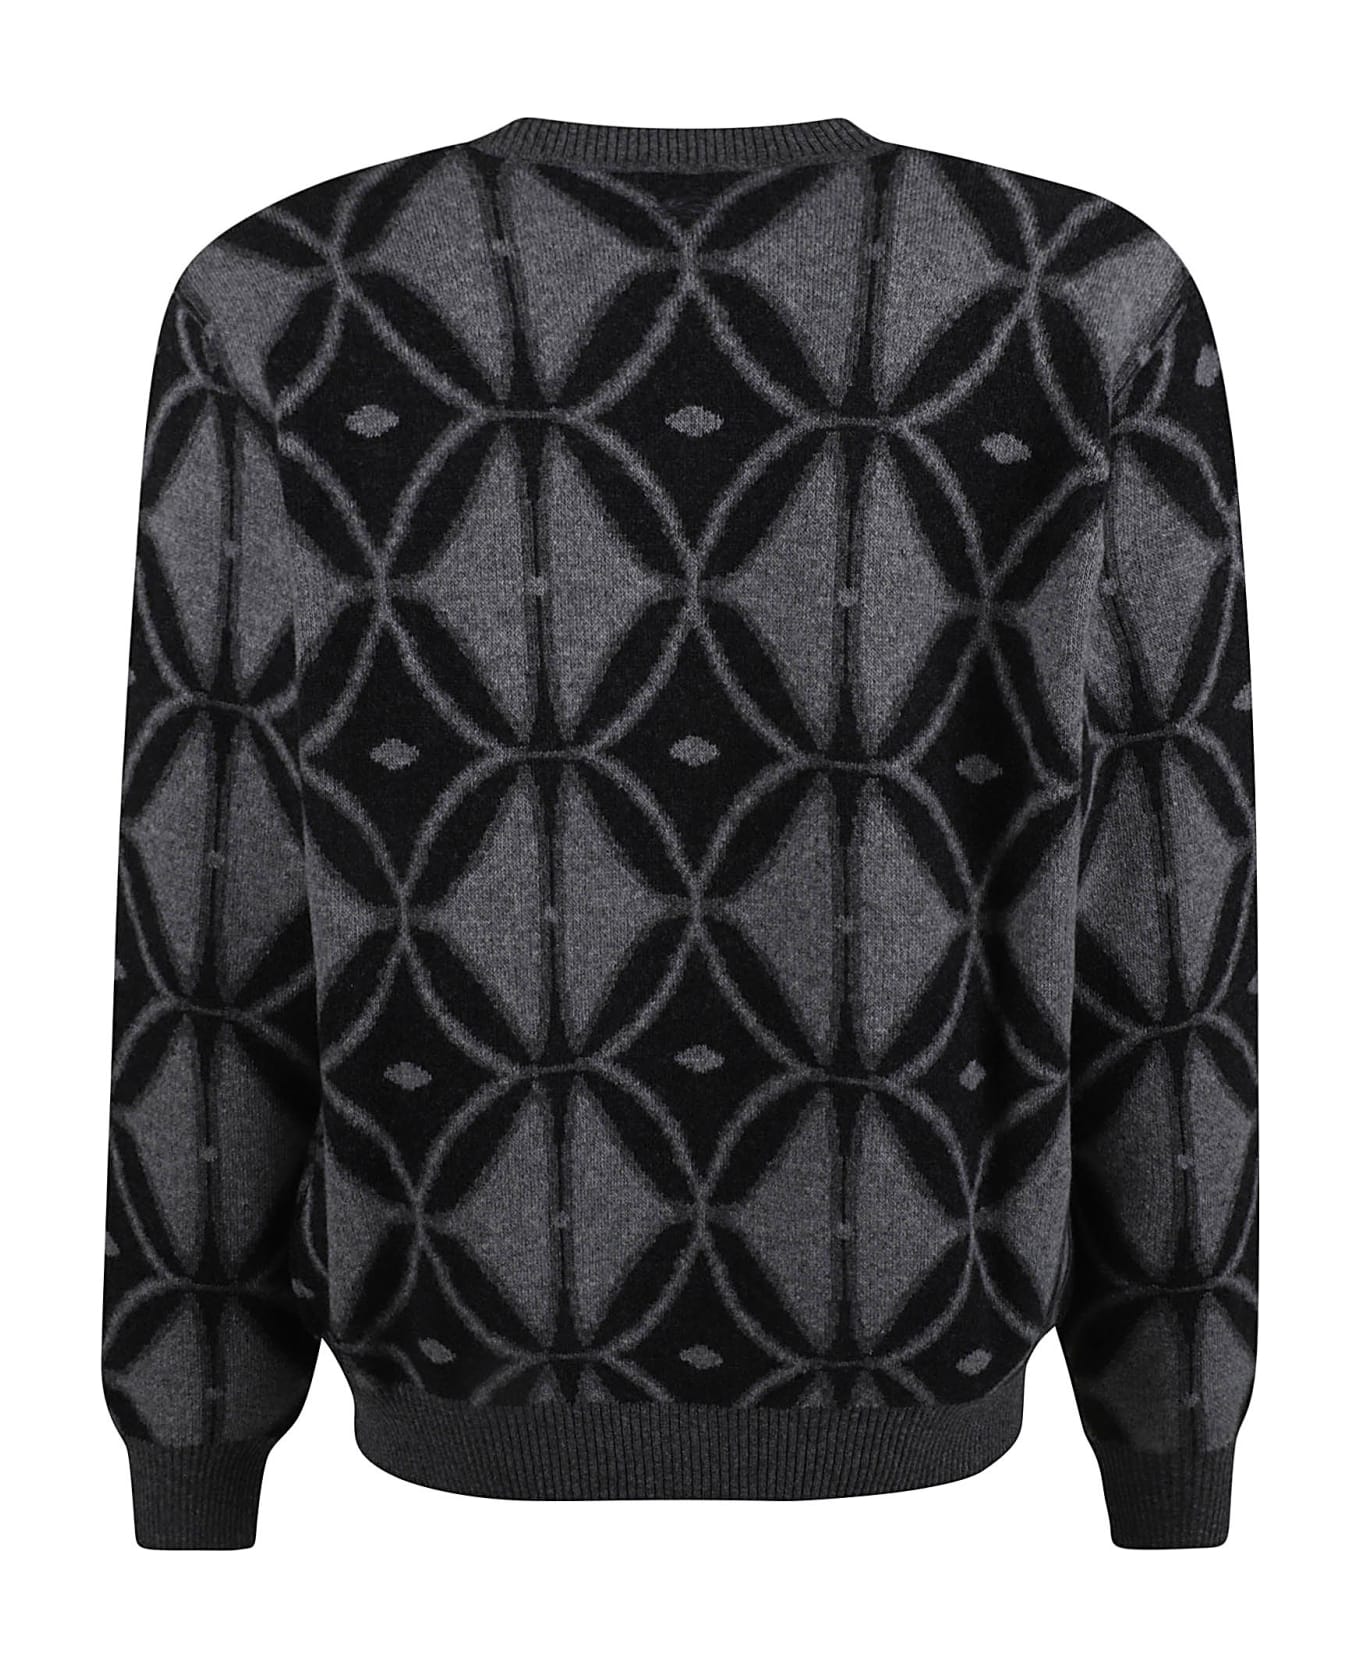 Etro Knitted Sweater - Grey